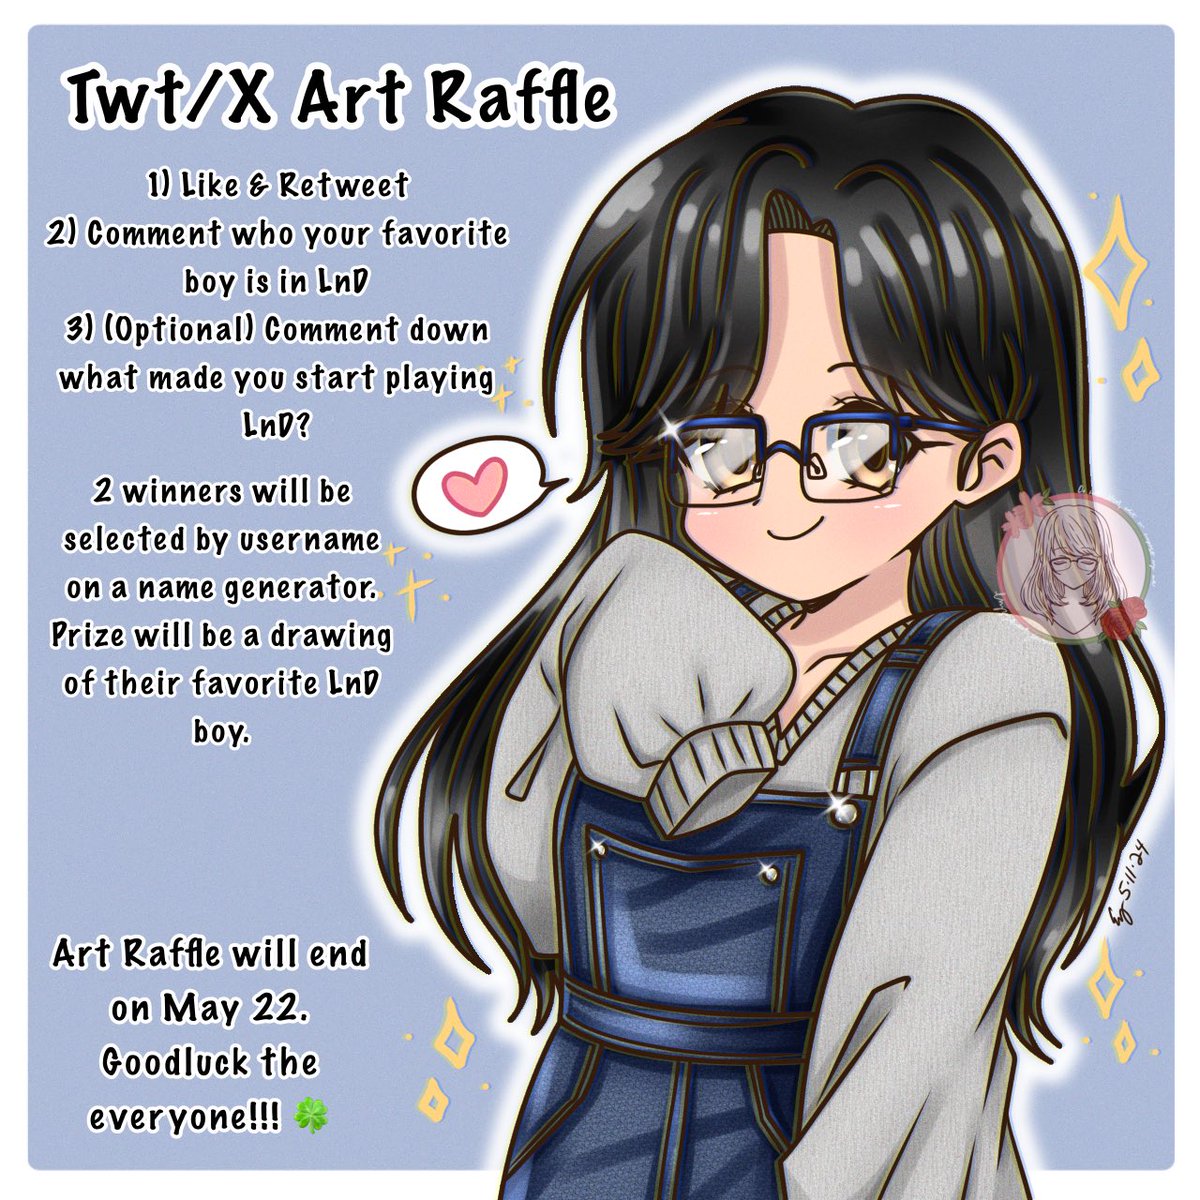 ✨Twt/X Art Raffle!✨

2 winners will be selected & will get a digital art piece of their favorite LnD character~

Rules & info ⬇️